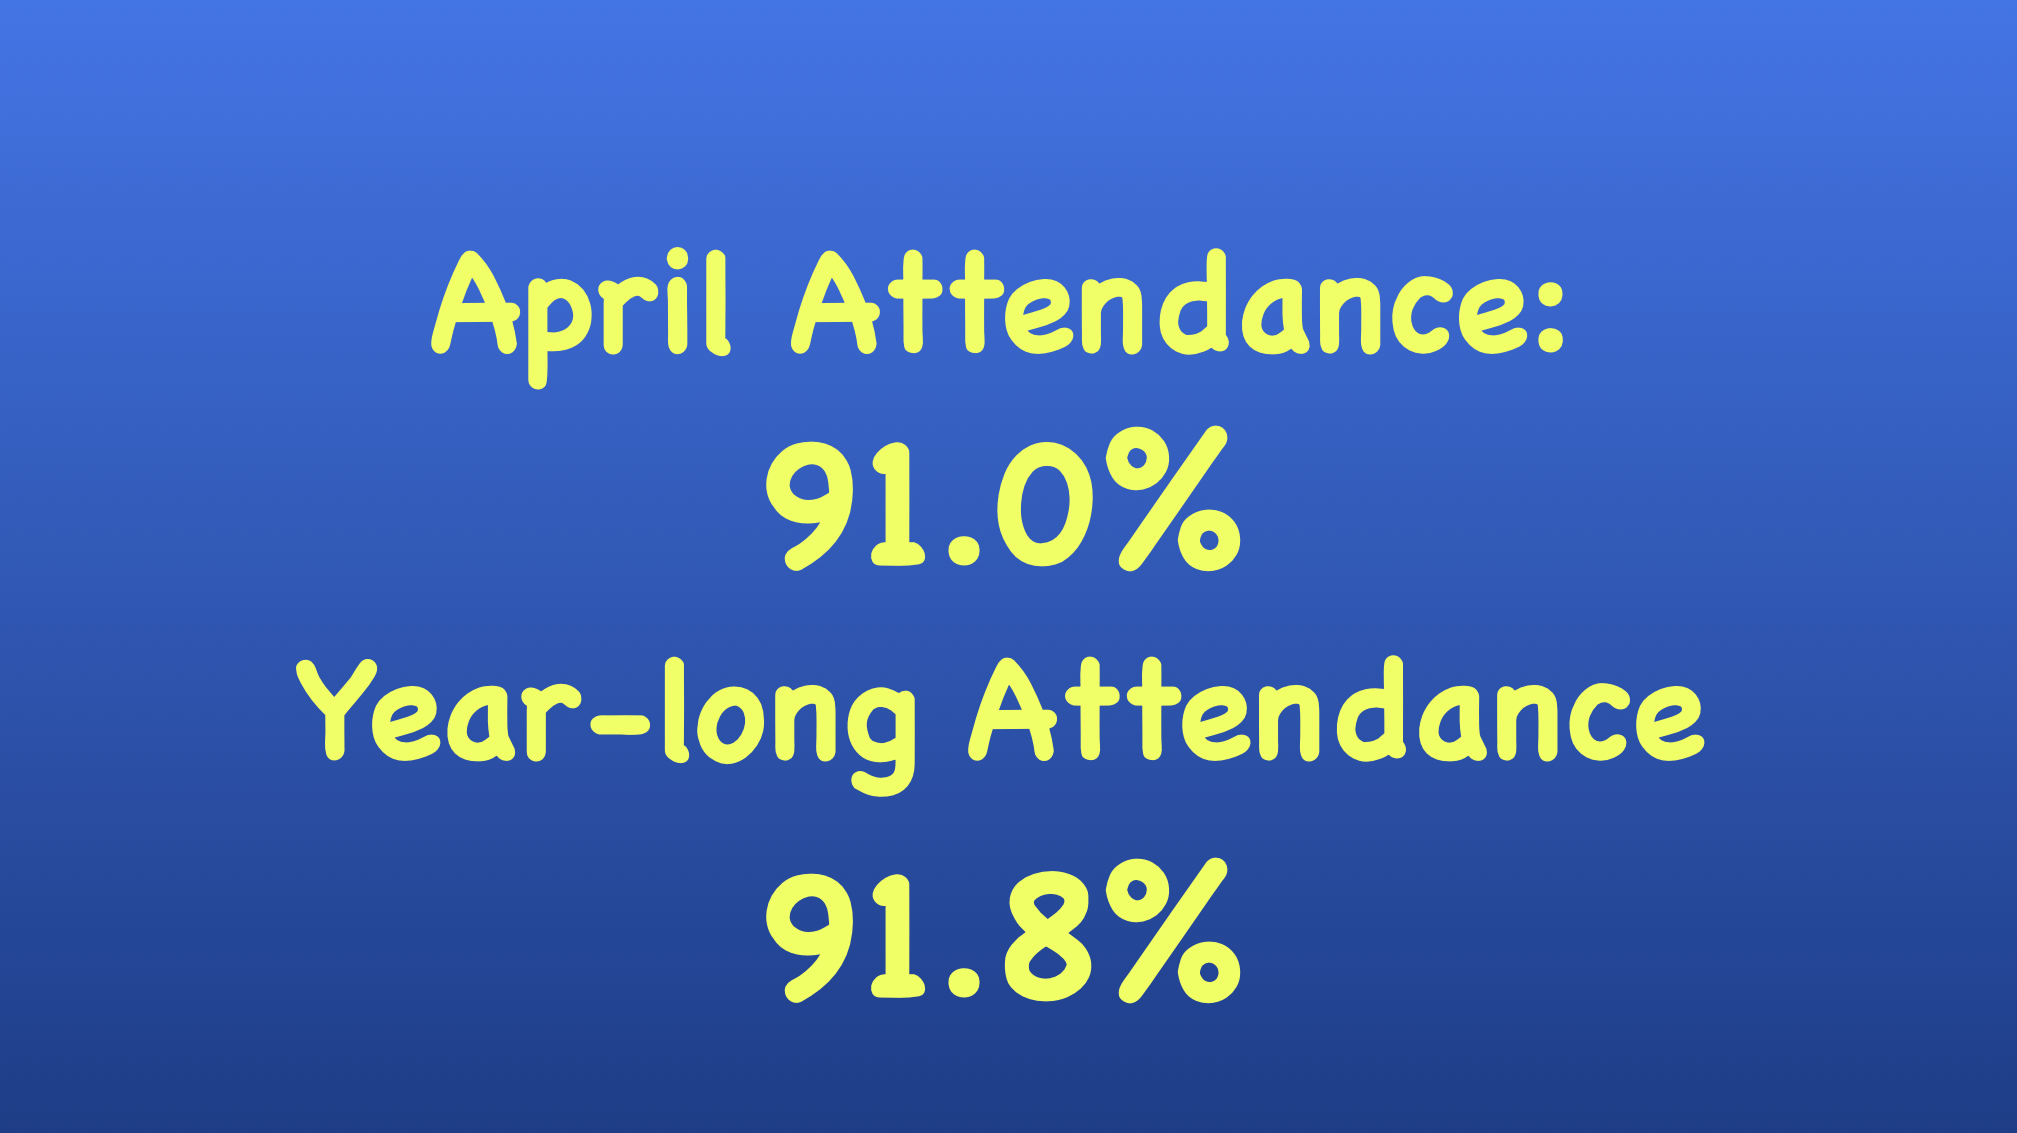 April's average daily attendance was 91.0%